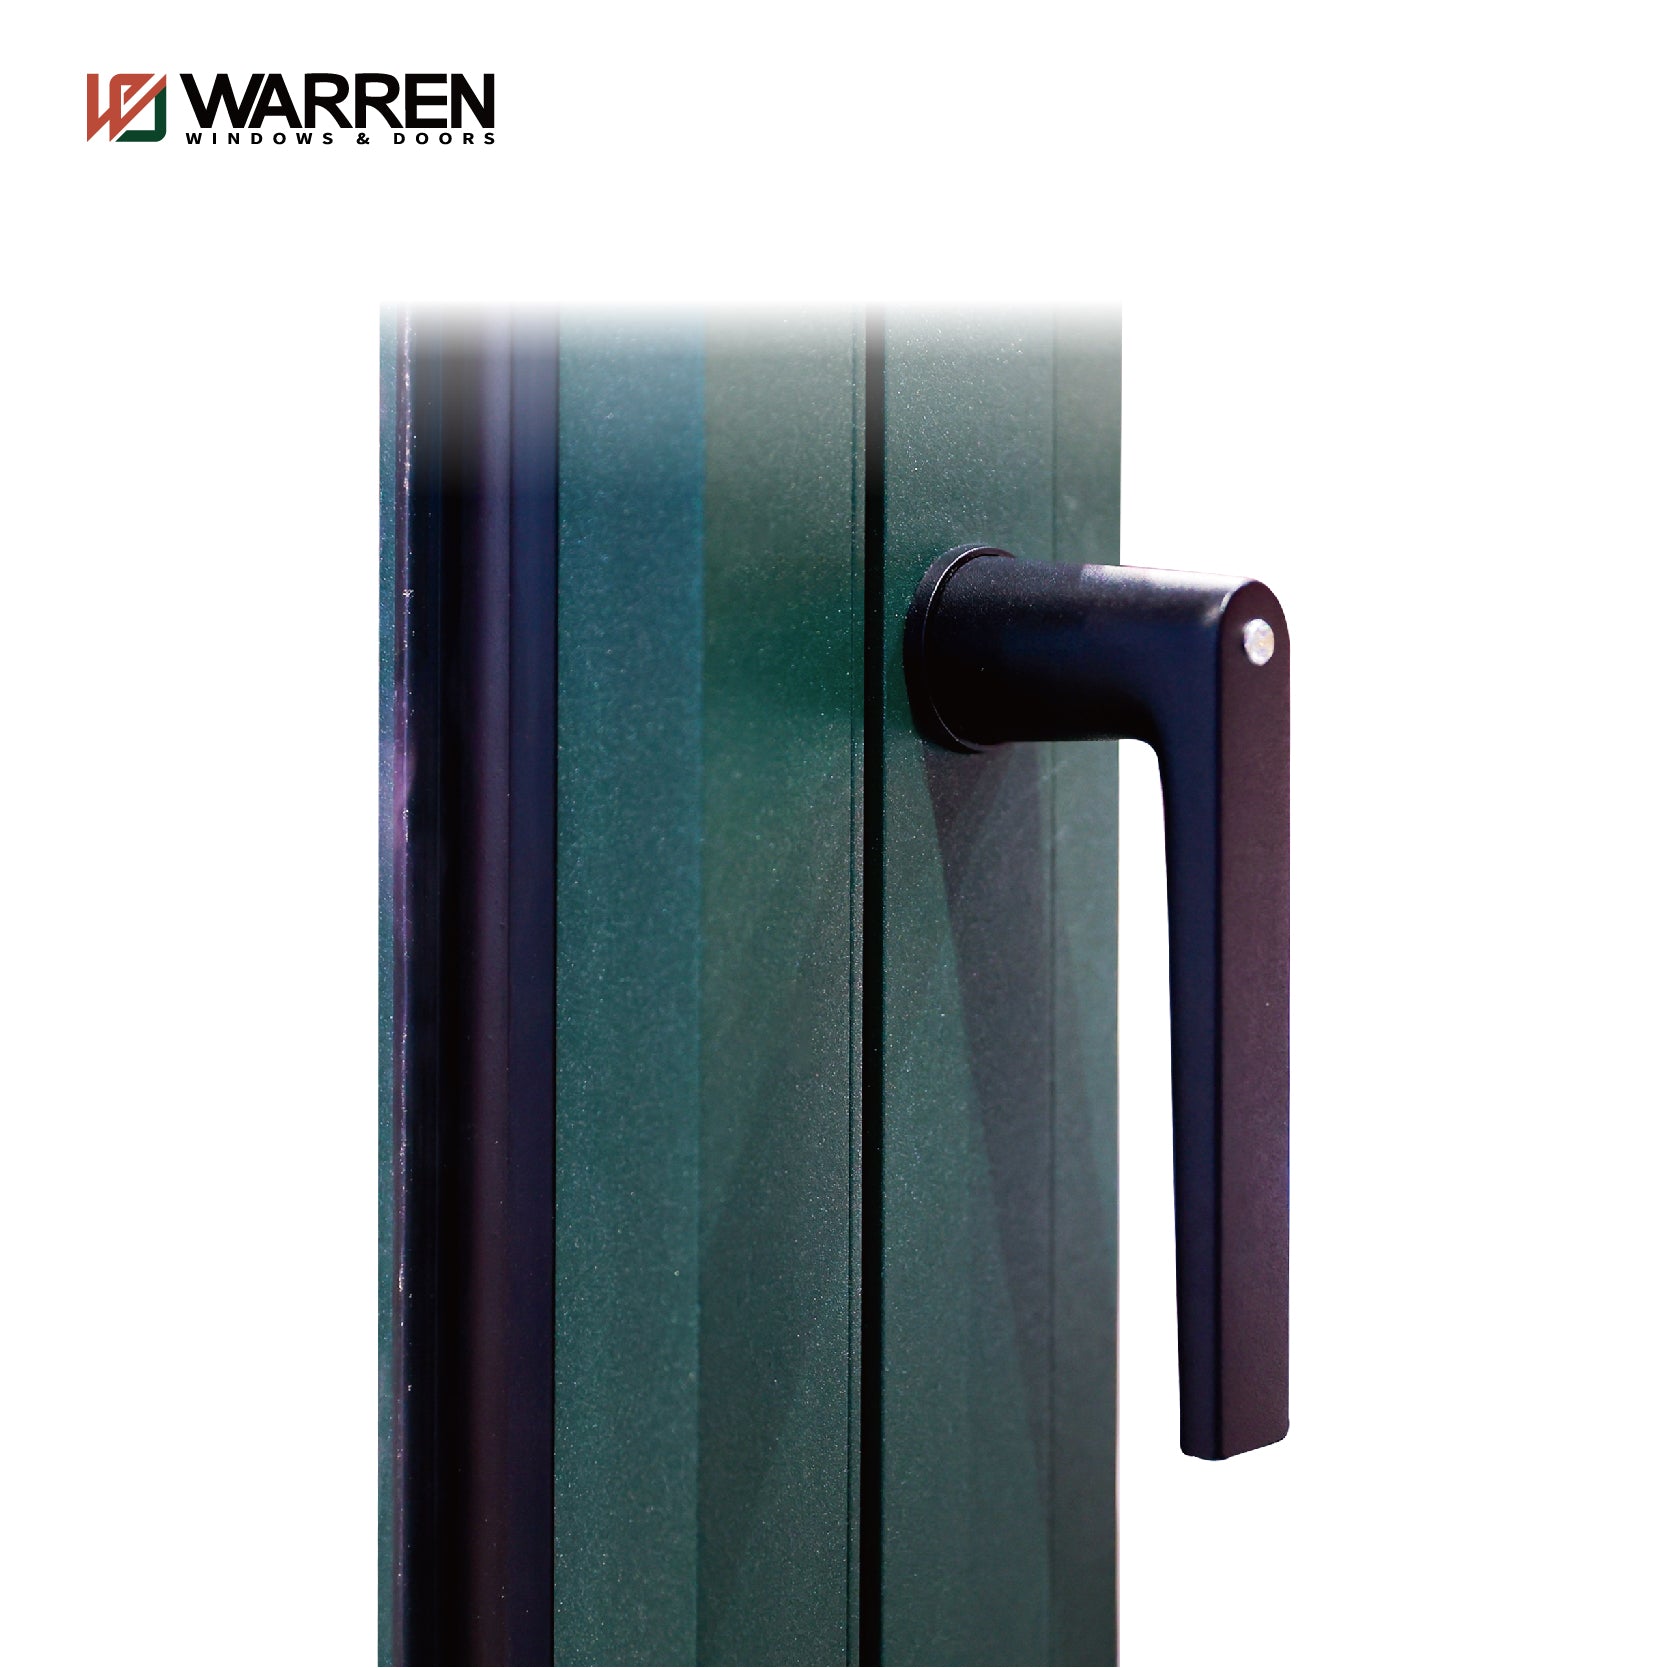 Warren 2 foot window hot sale high performance thermal break casement awning window with fully tempered glass